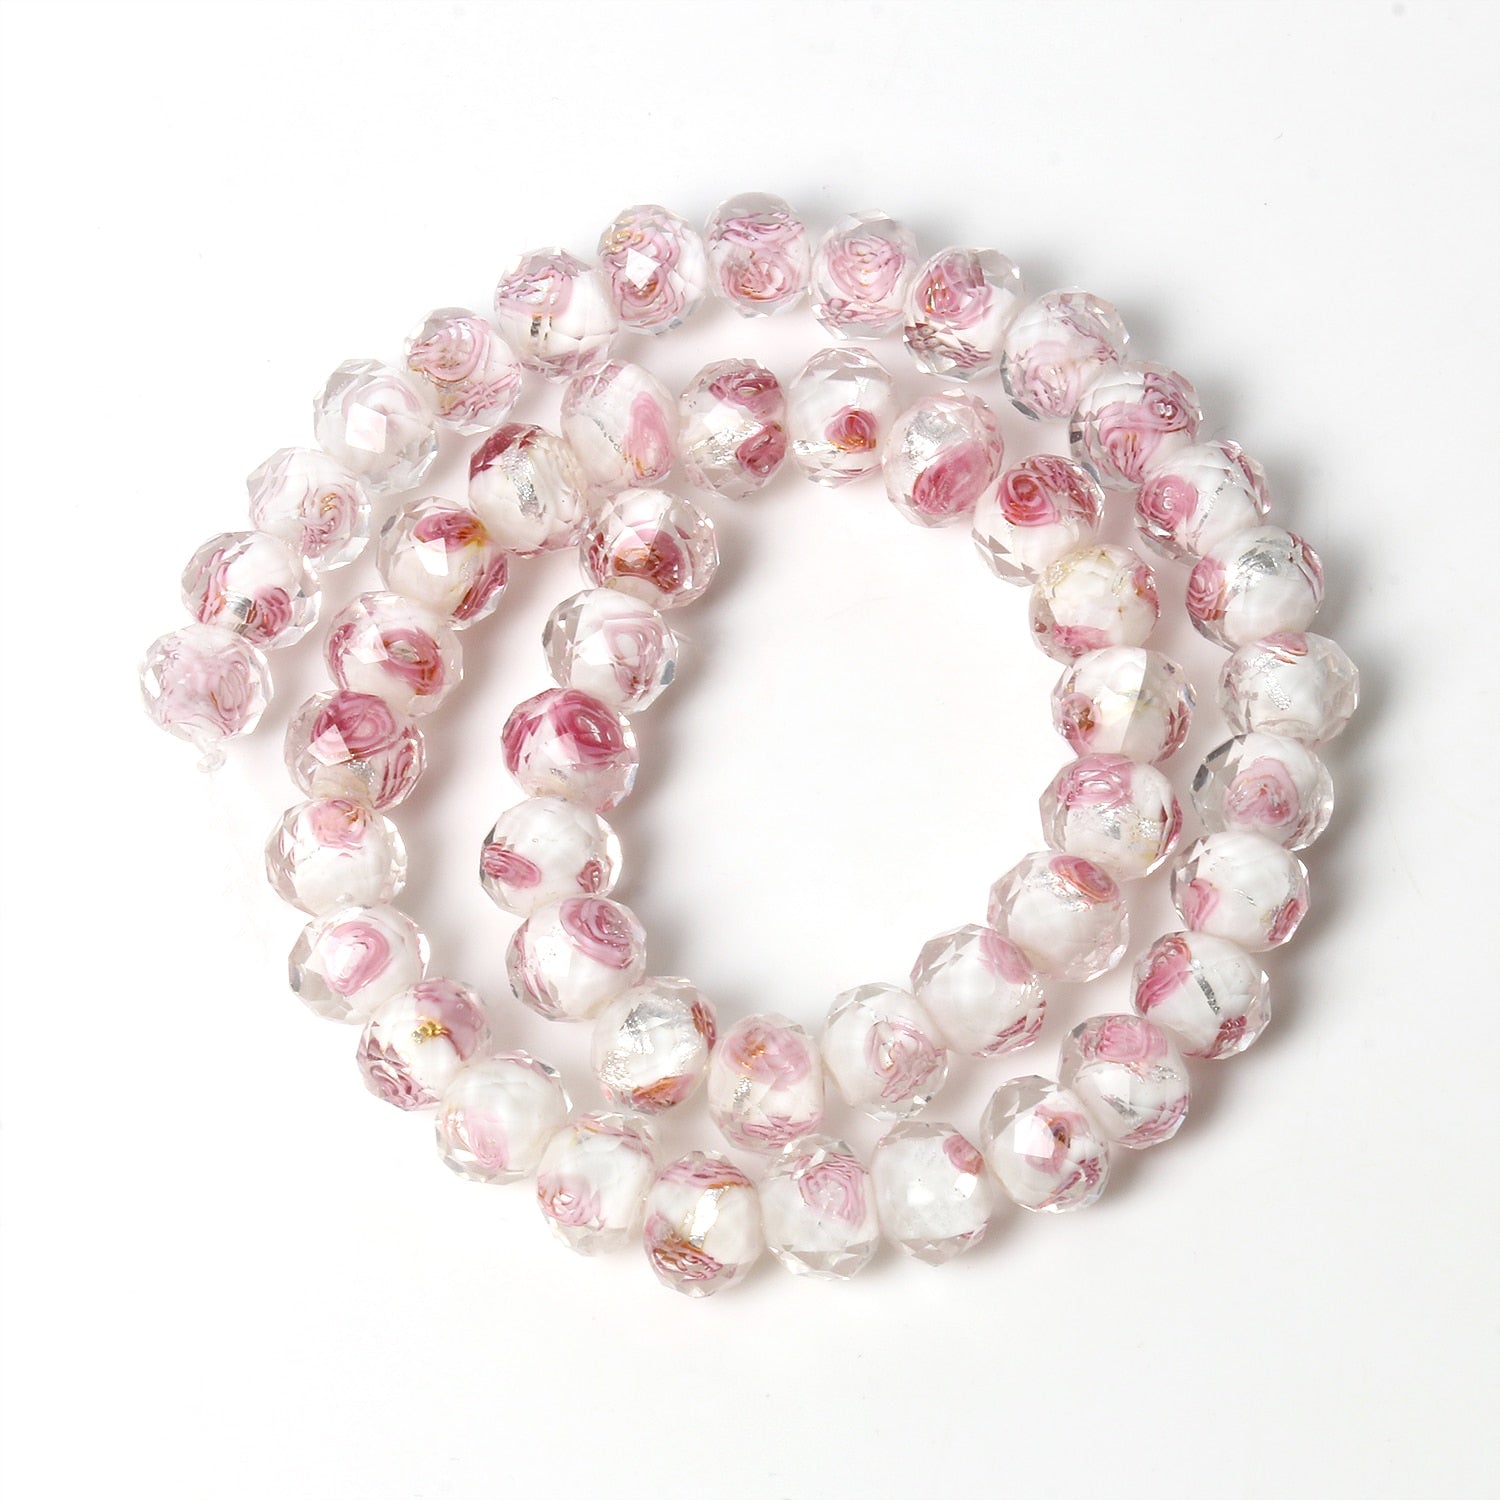 Ten Murano Lampwork Crystal Faceted Glass Beads Pink White Flower for DIY Jewellery Making